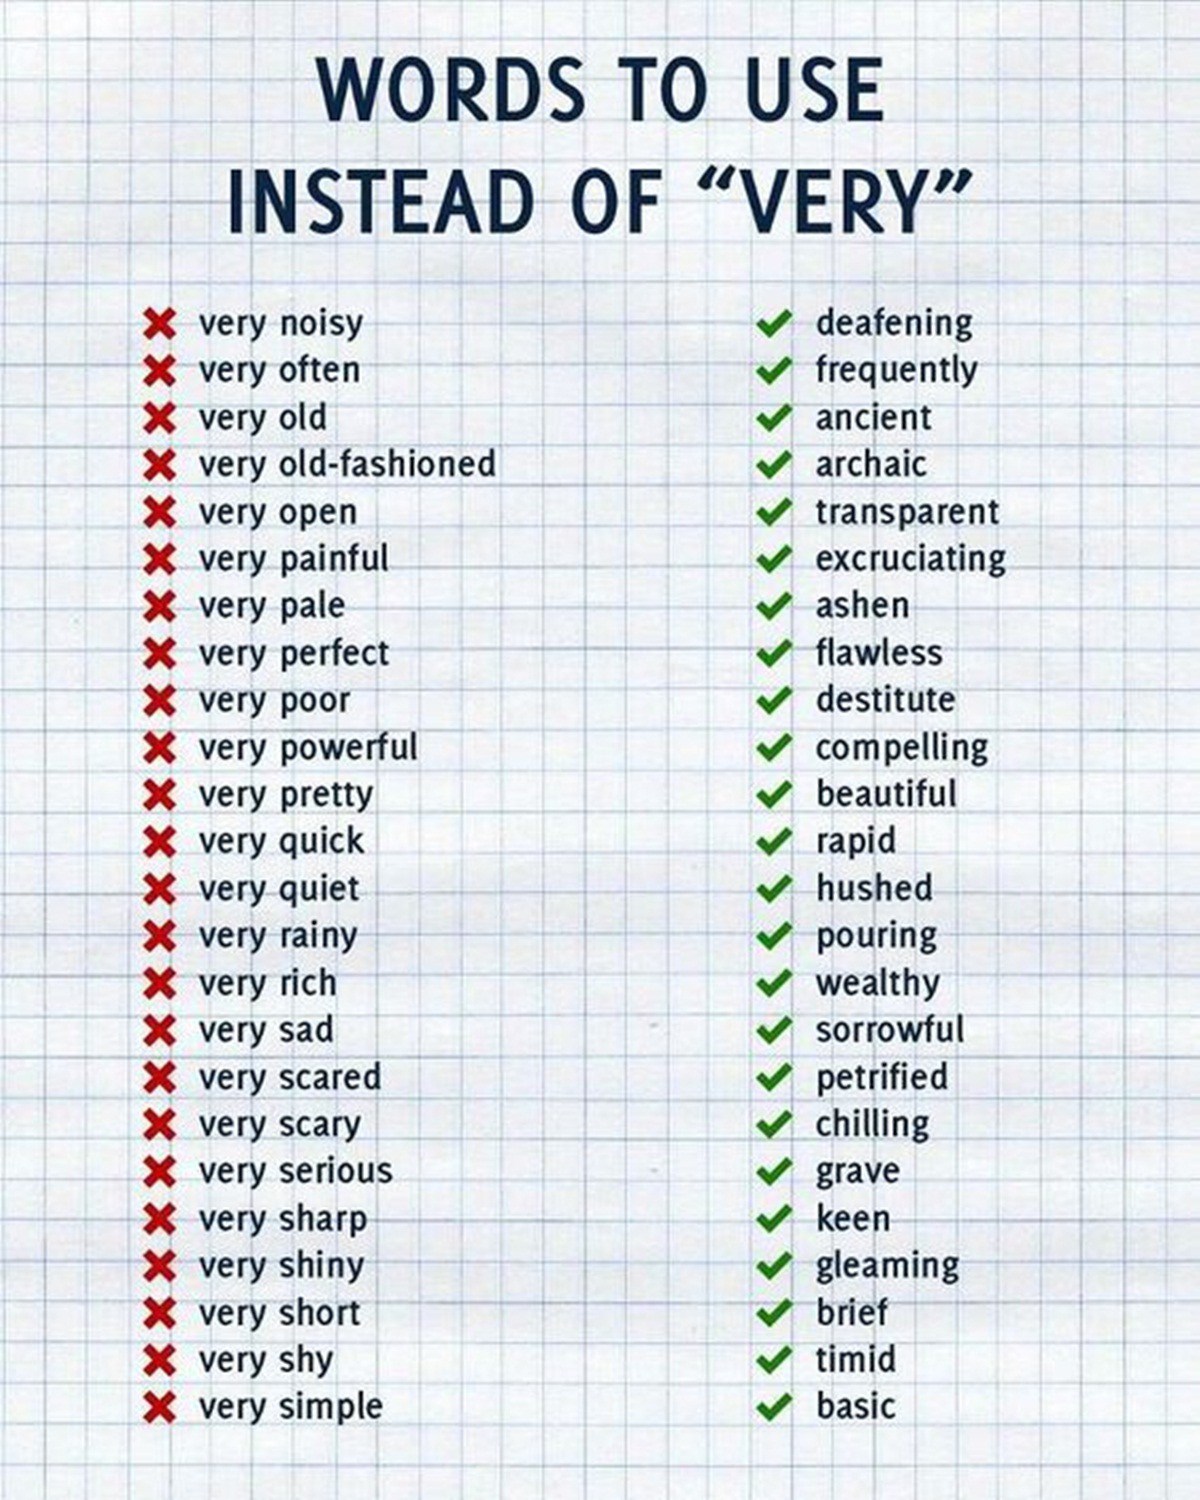 go-english-other-words-to-use-instead-of-very